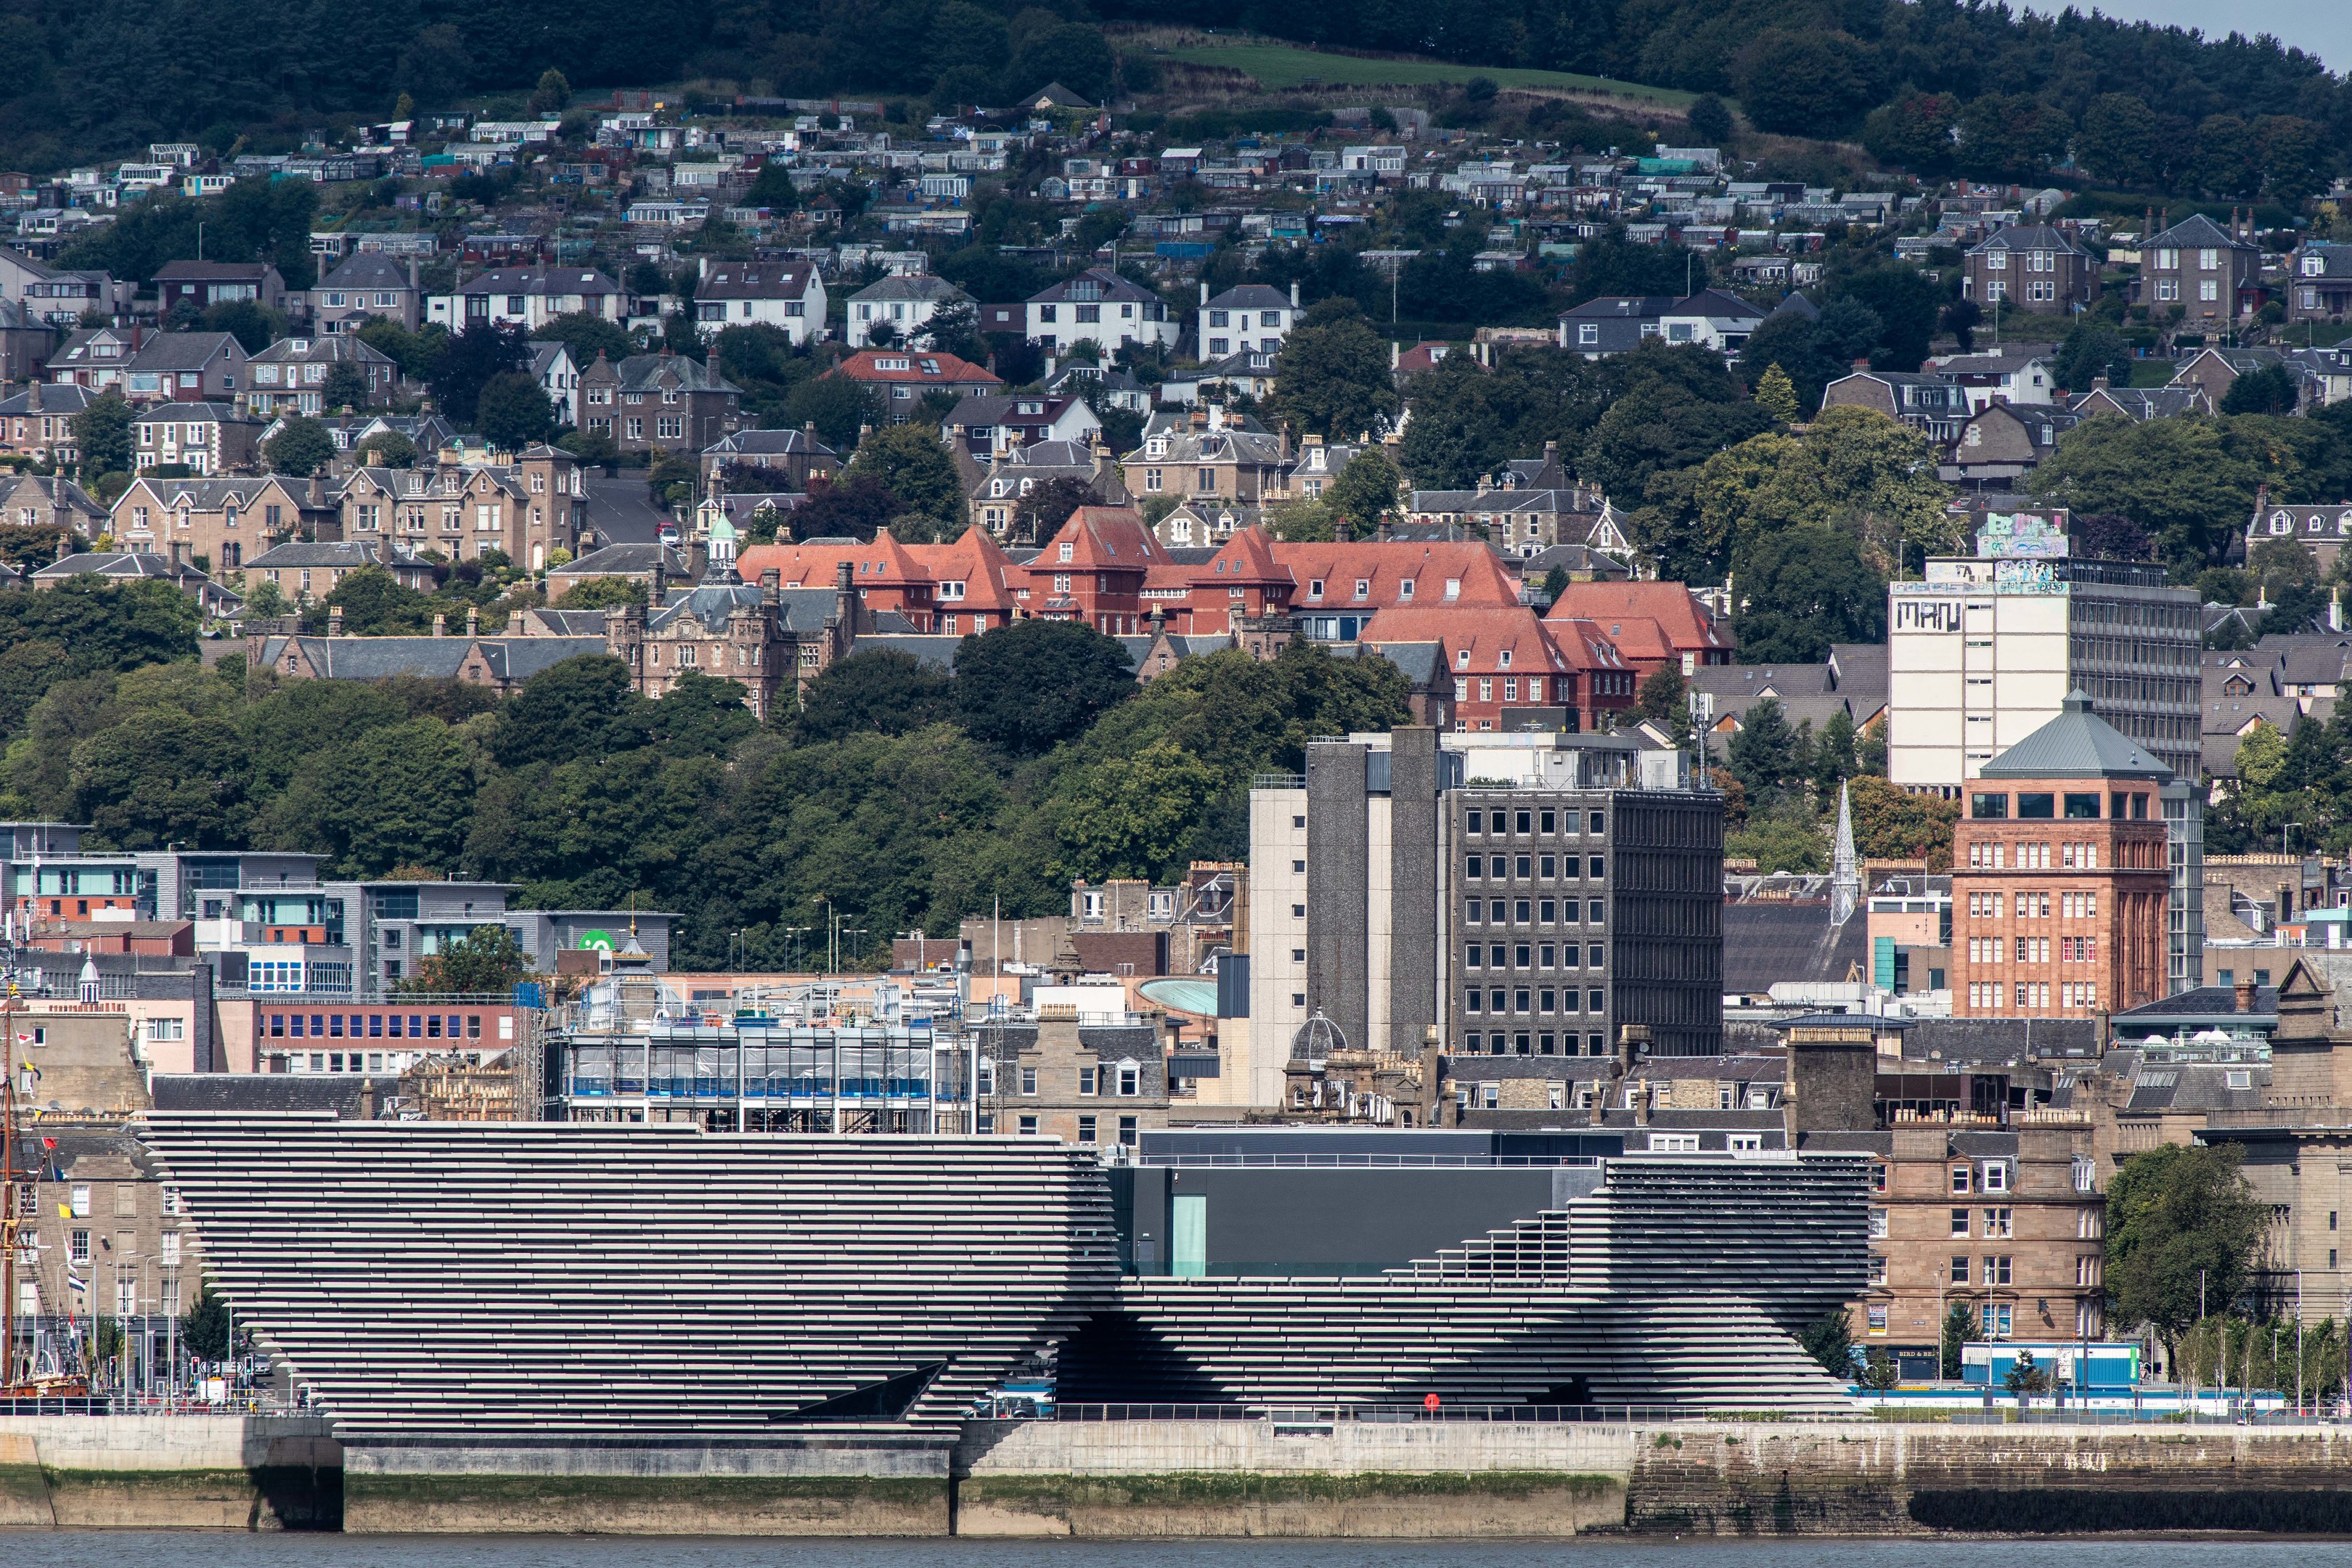 The iconic V&A Dundee viewed from across the Tay in Newport